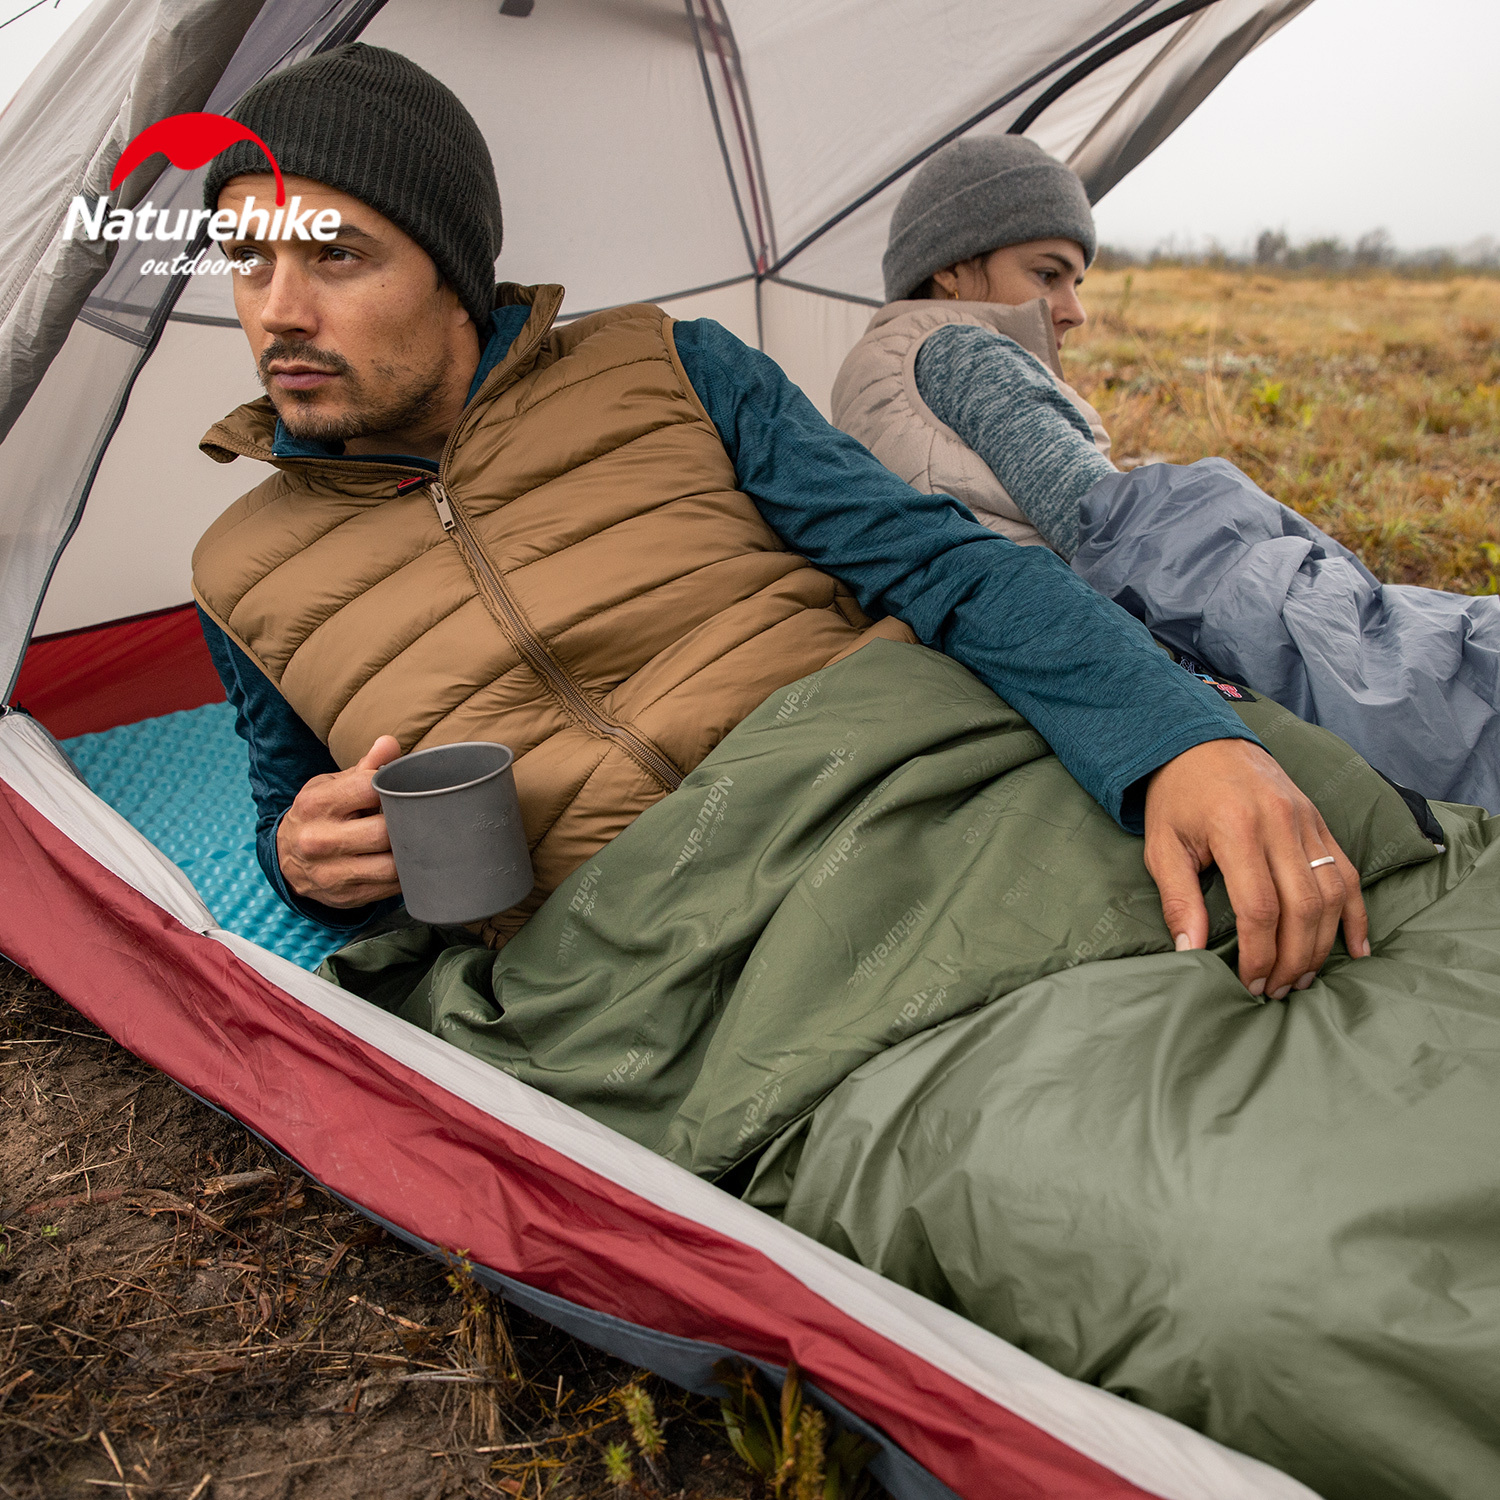 

Naturehike Ultralight Lw180 Waterproof Cotton Sleeping Bag - Perfect For Summer Hiking, Camping, And Sunday Parties!